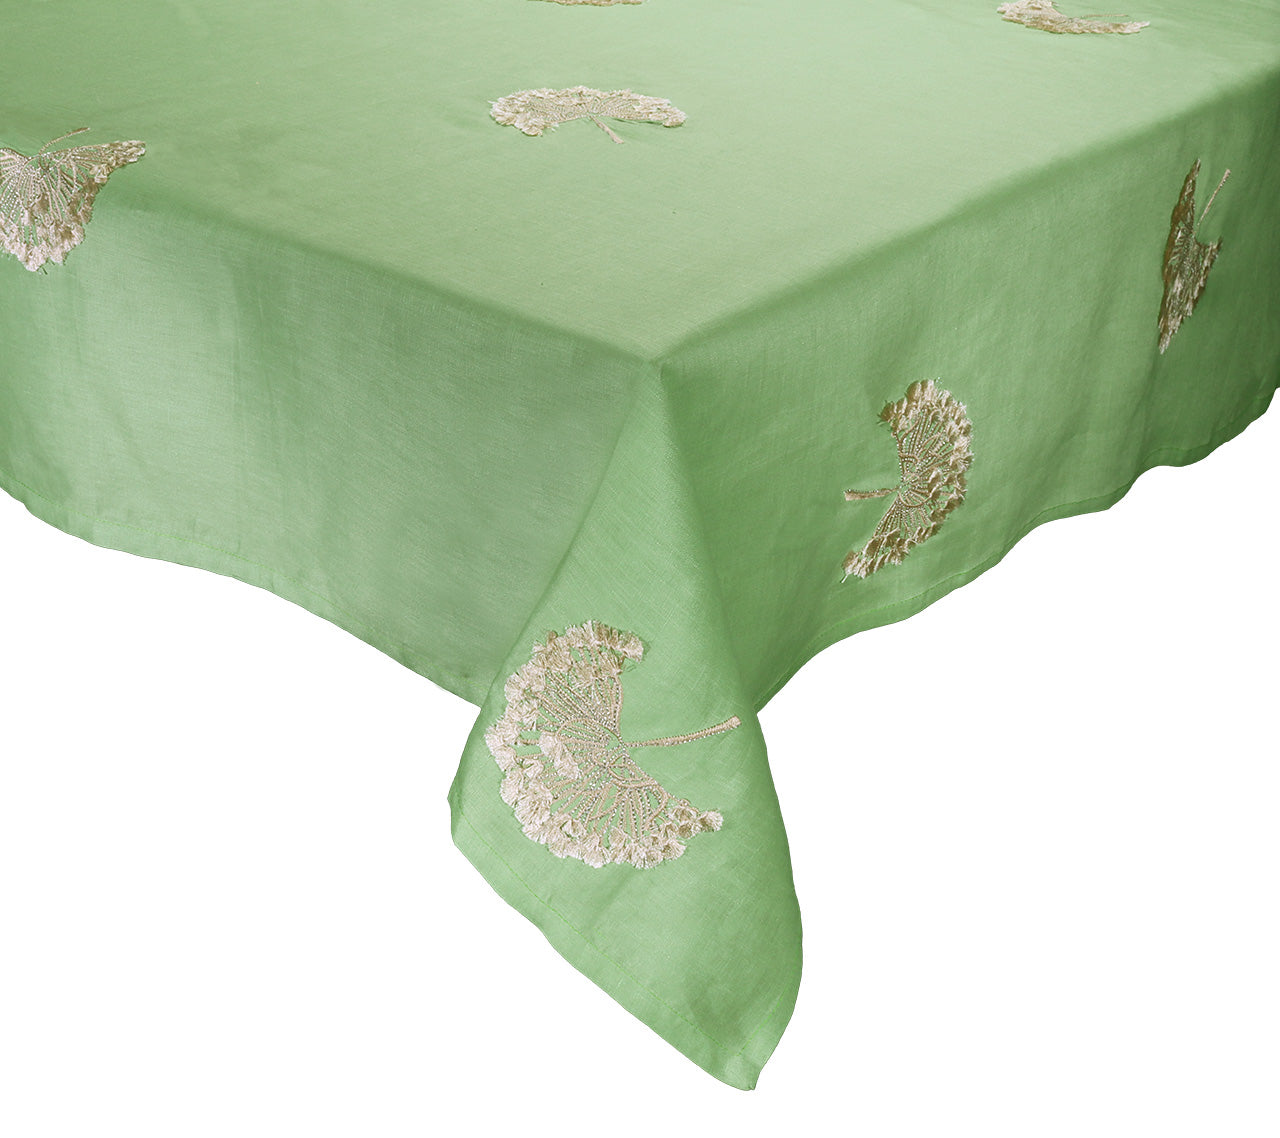 Palm Fringe Tablecloth in Green & Natural